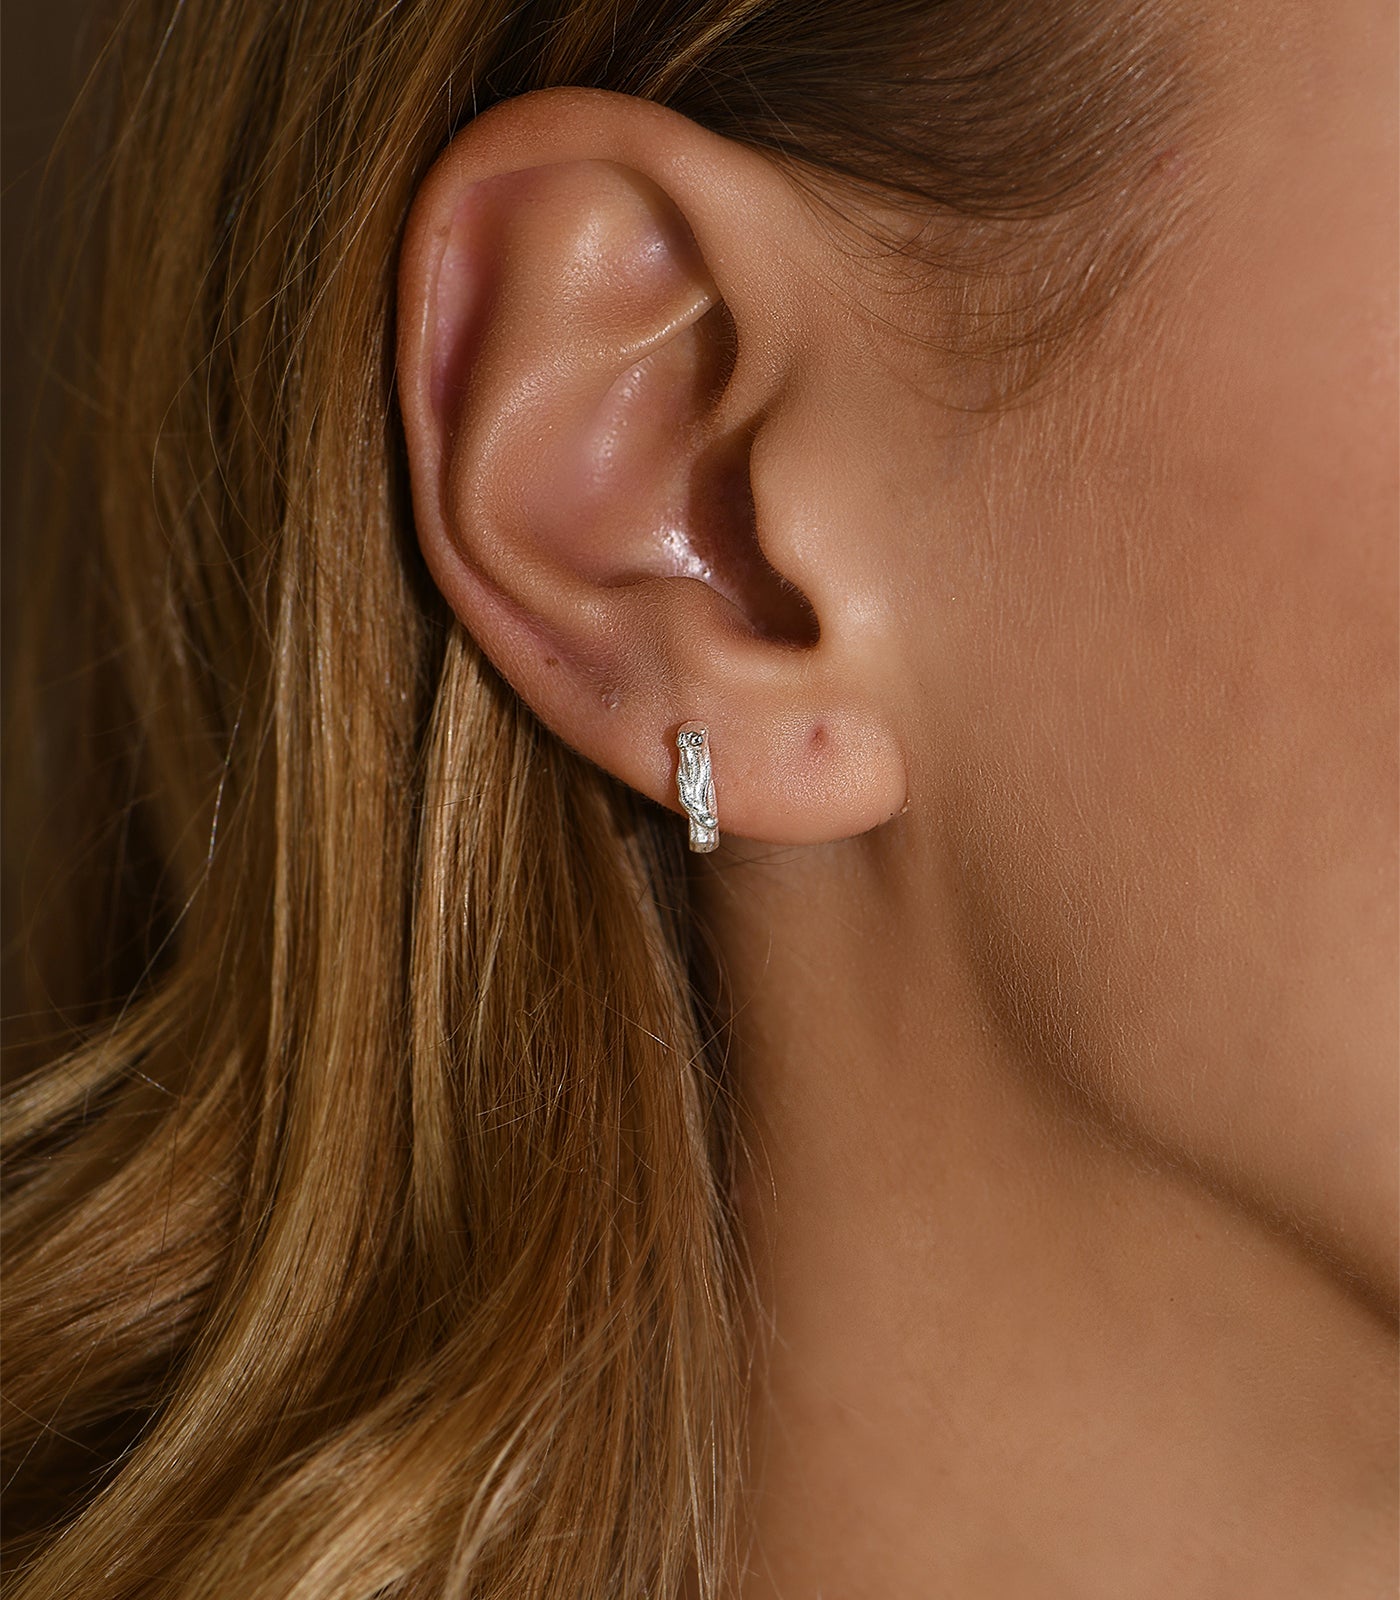 A sterling silver stud earring. The earring is detailed to resemble a small tree branch.